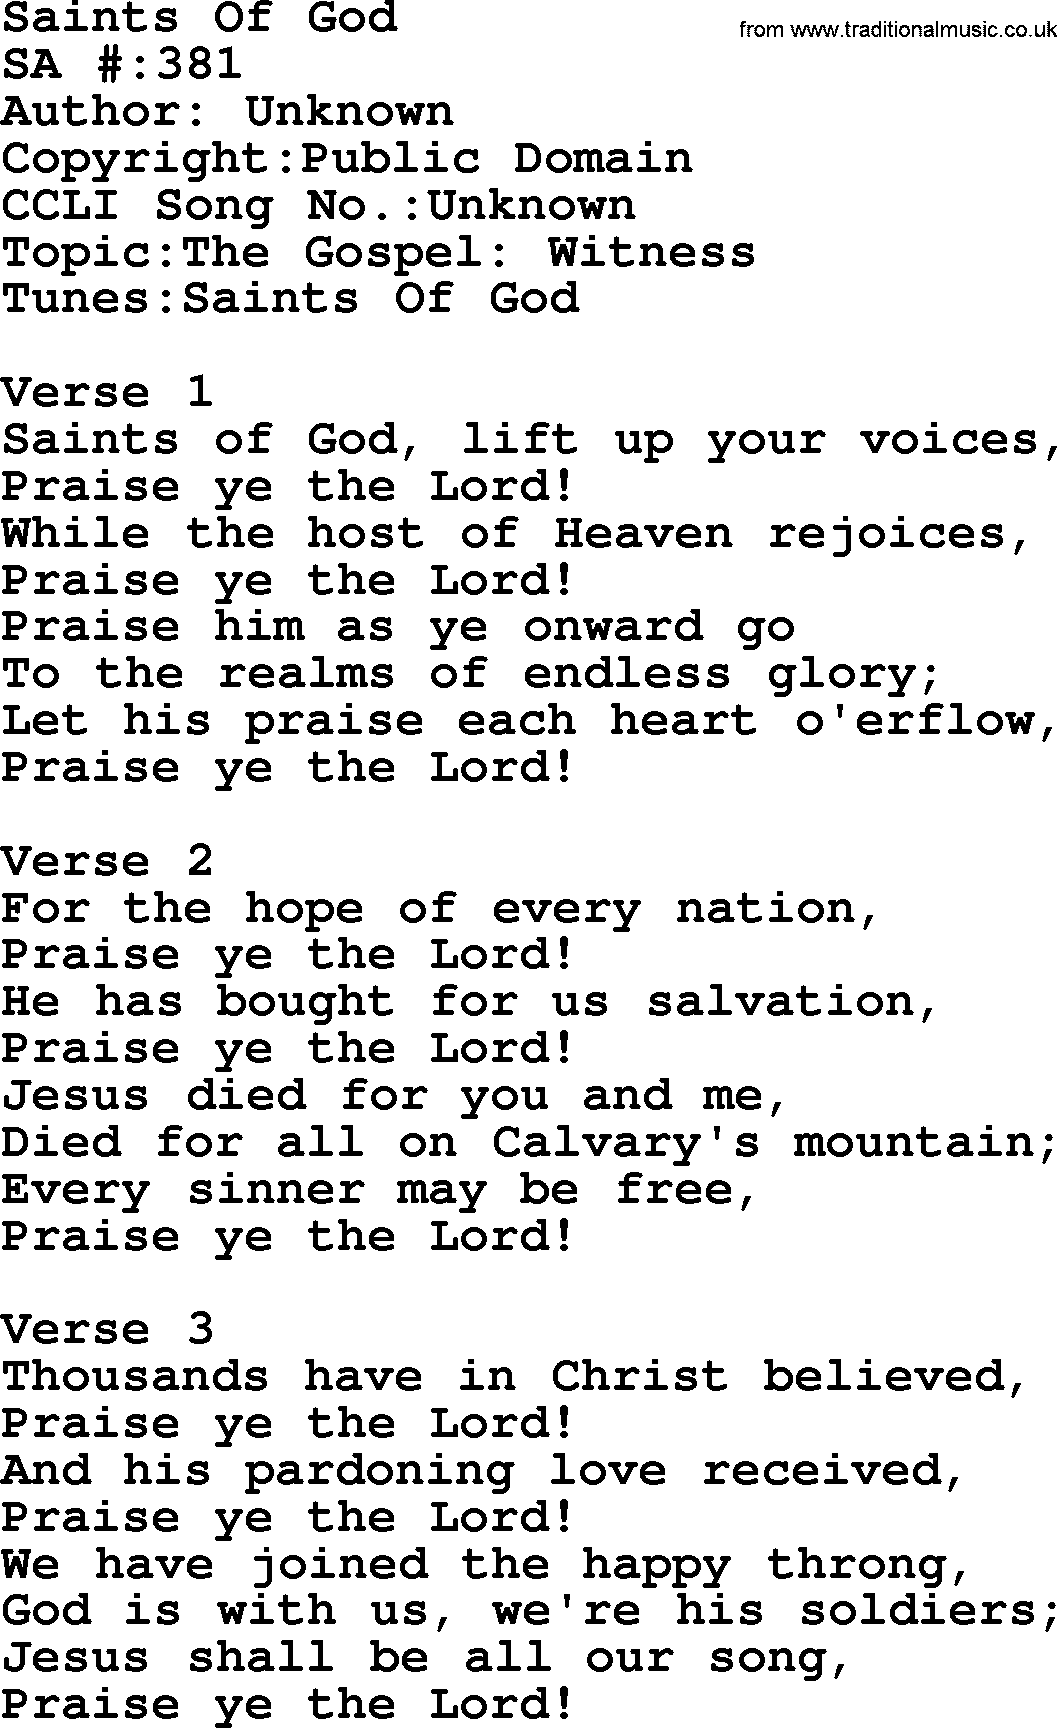 Salvation Army Hymnal, title: Saints Of God, with lyrics and PDF,